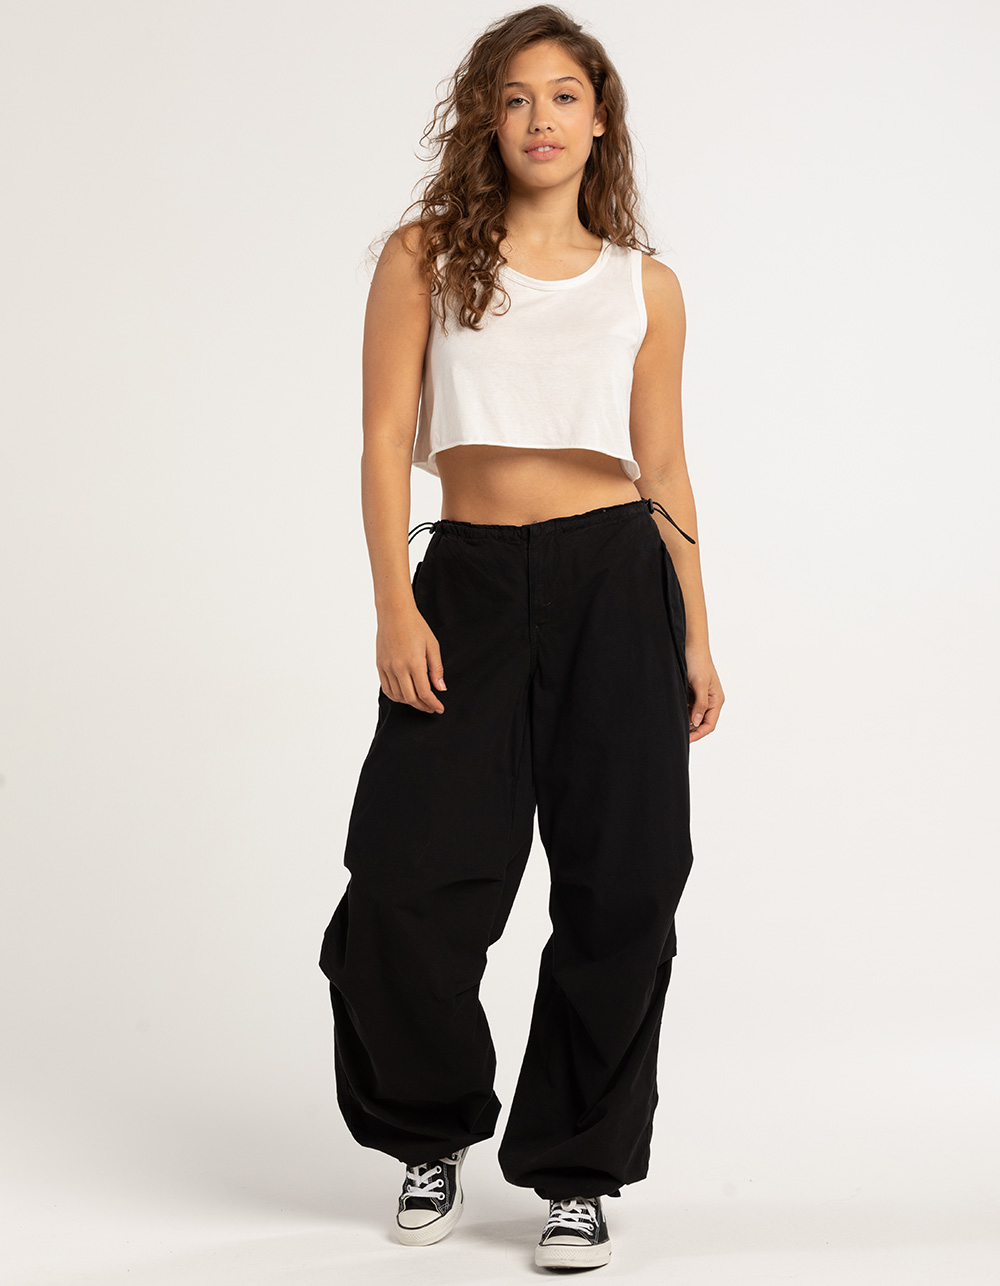 black denim baggy pants for girls and womens